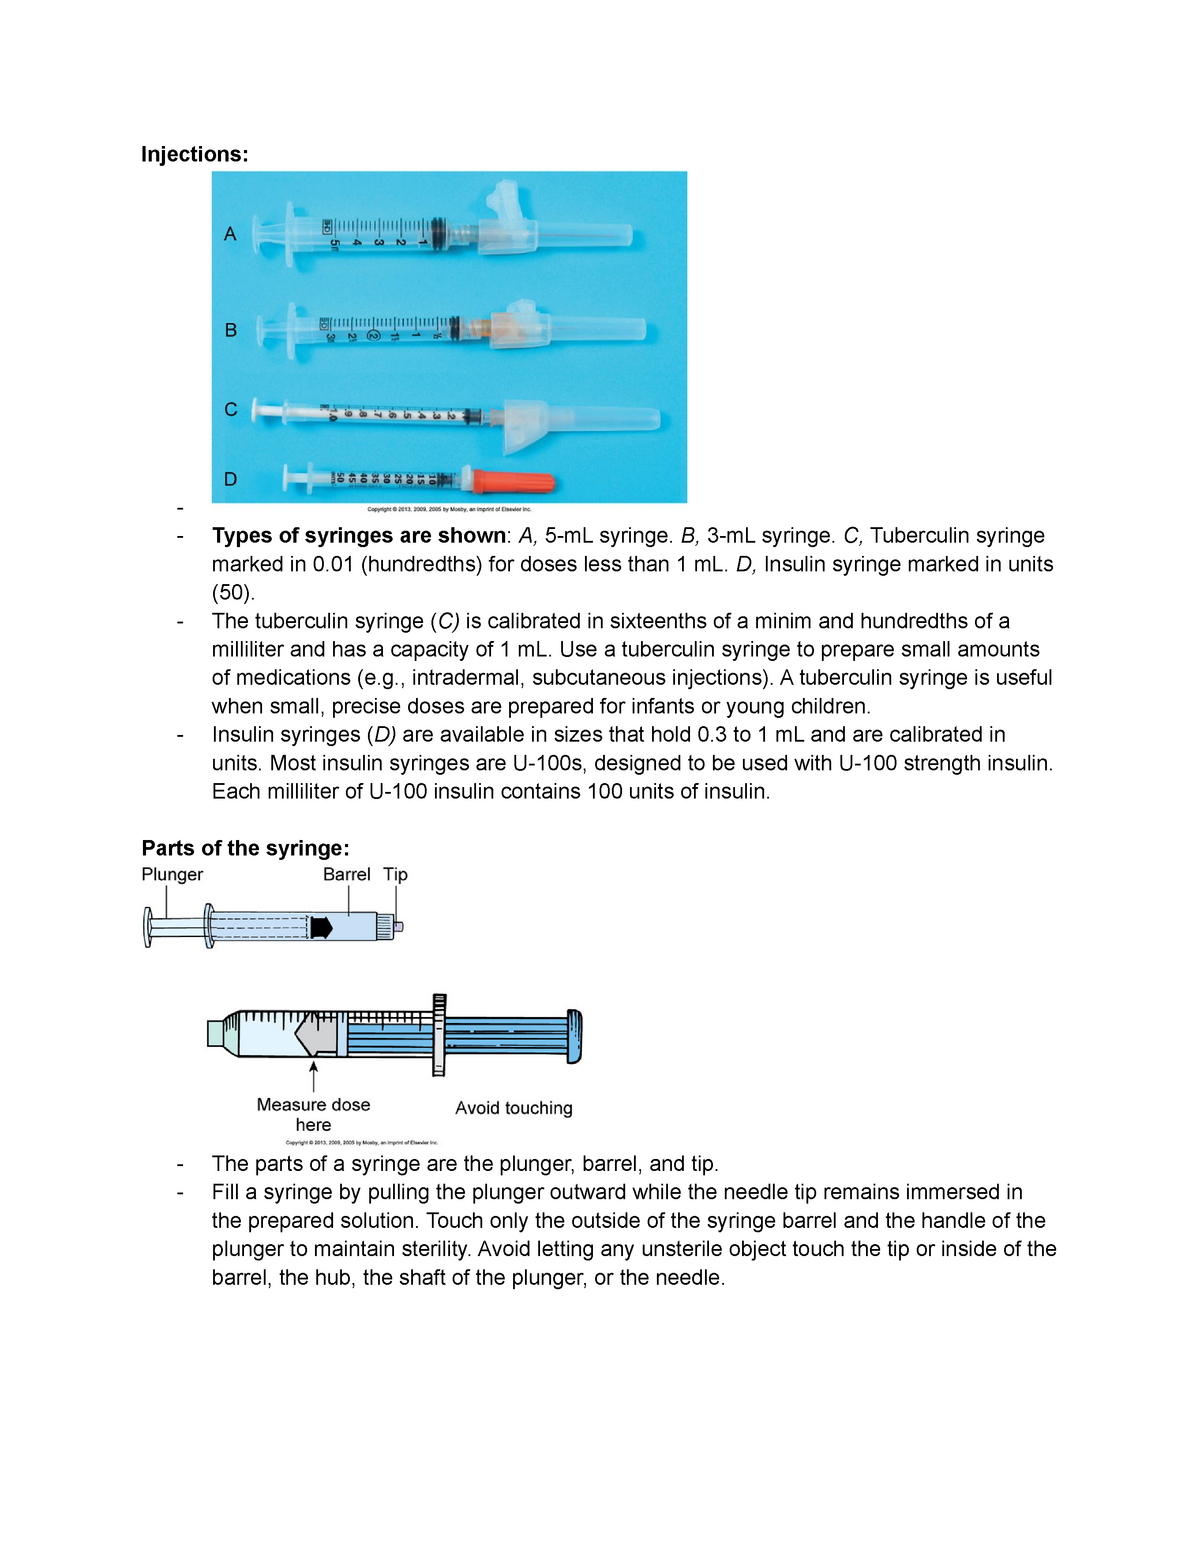 Injections P - Kristen Needler - Injections: - Types of syringes are ...